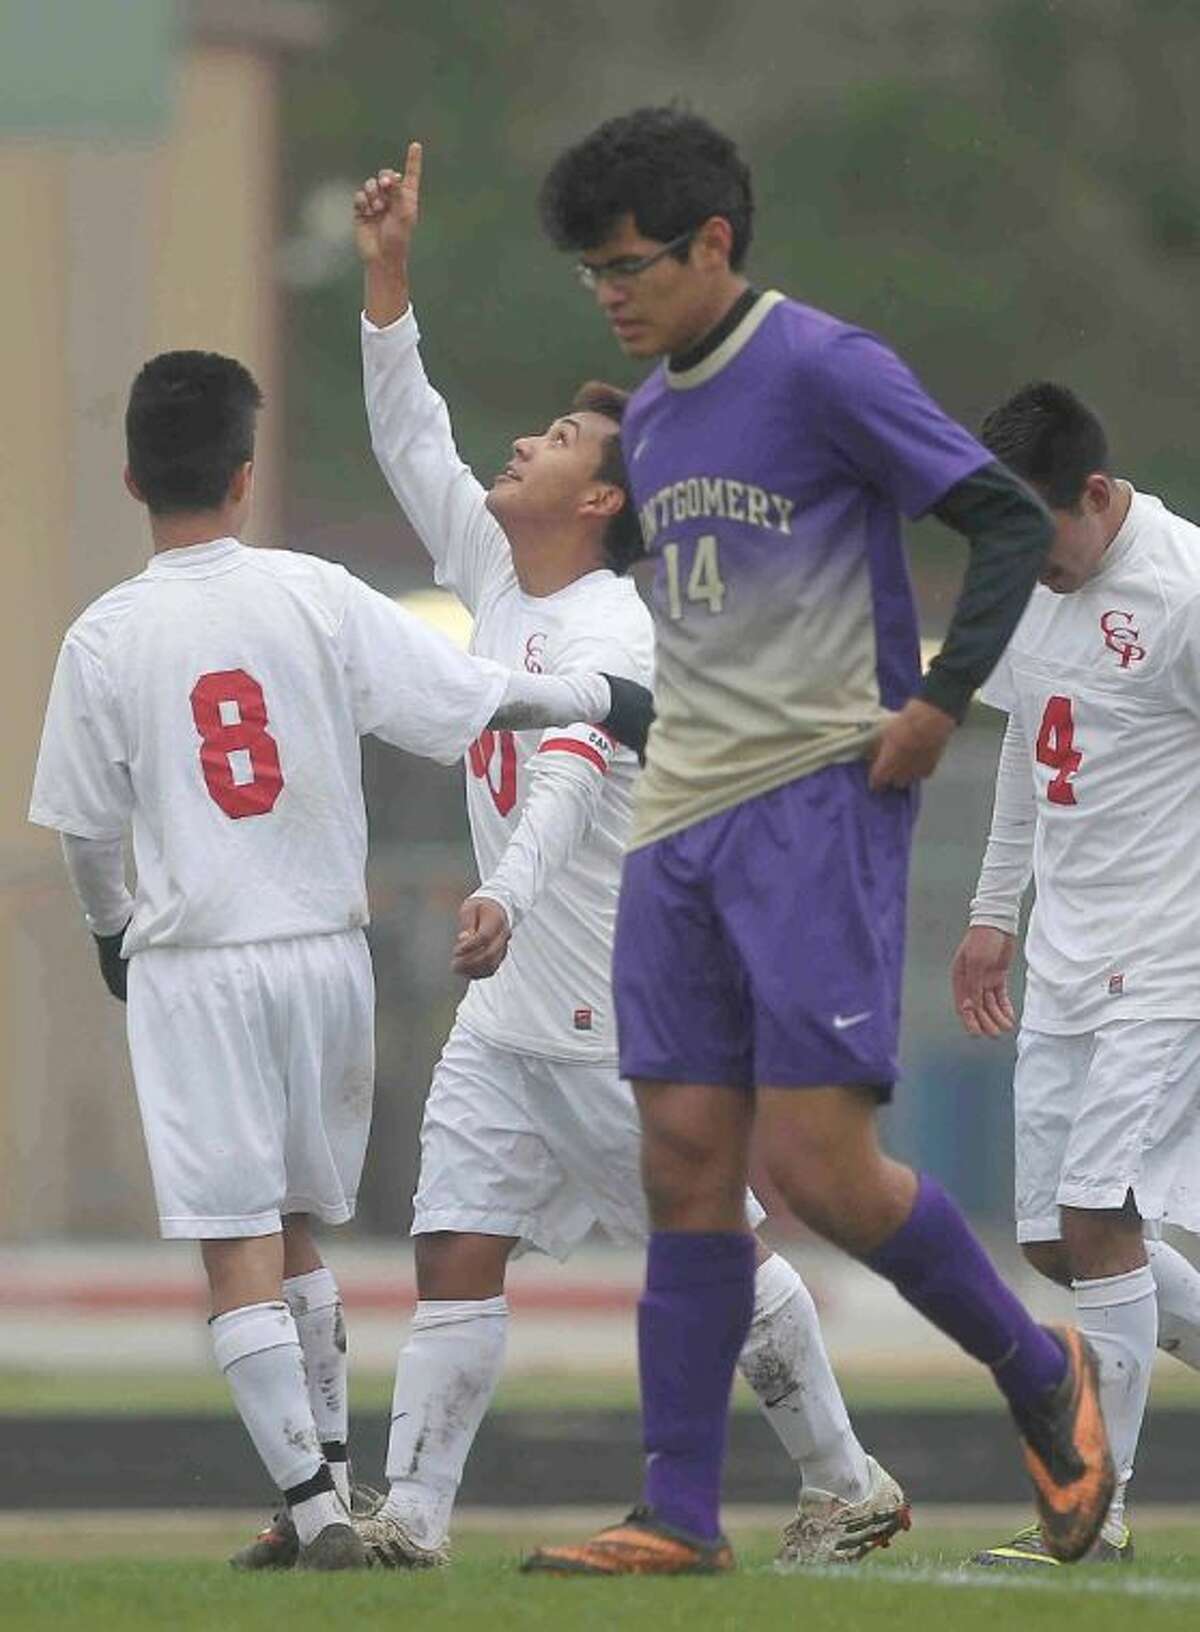 Caney Creek’s Jose Contreras celebrates after scoring the first goal during a District 39-4A match against Montgomery on Wednesday in Grangerland. To view or purchase this photo and others like it, visit HCNpics.com.